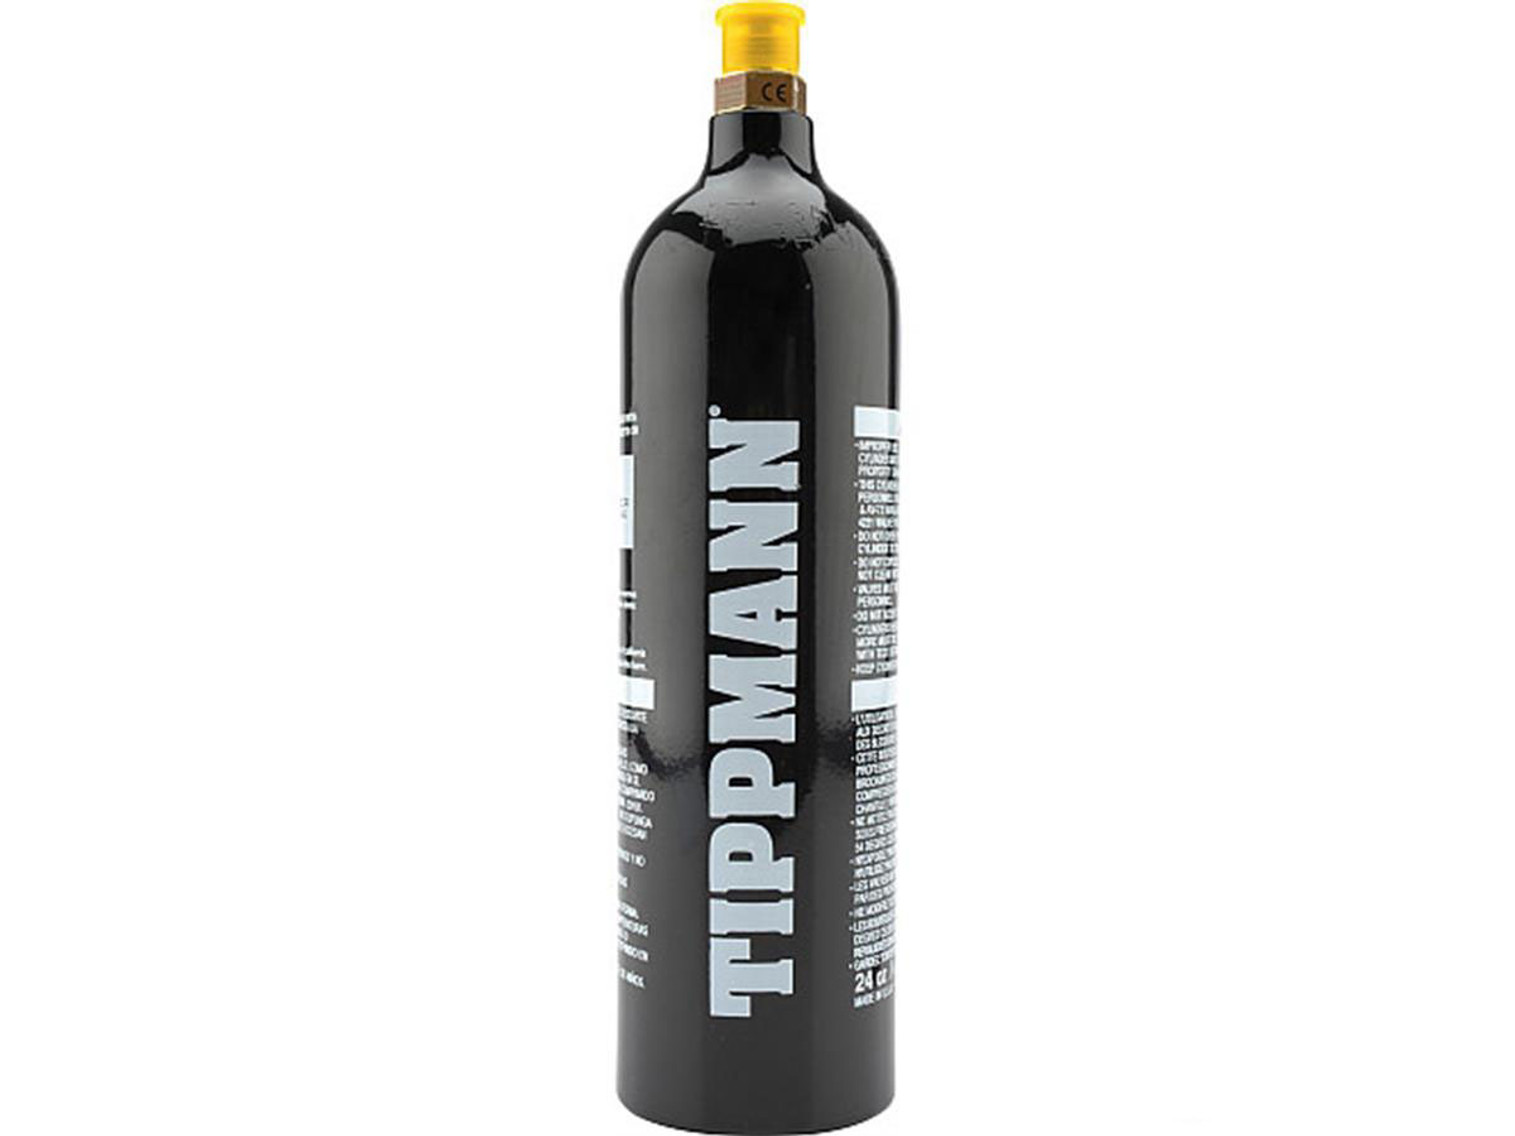 Tippmann Aluminum CO2 Tank with Repeater (Capacity: 24oz)